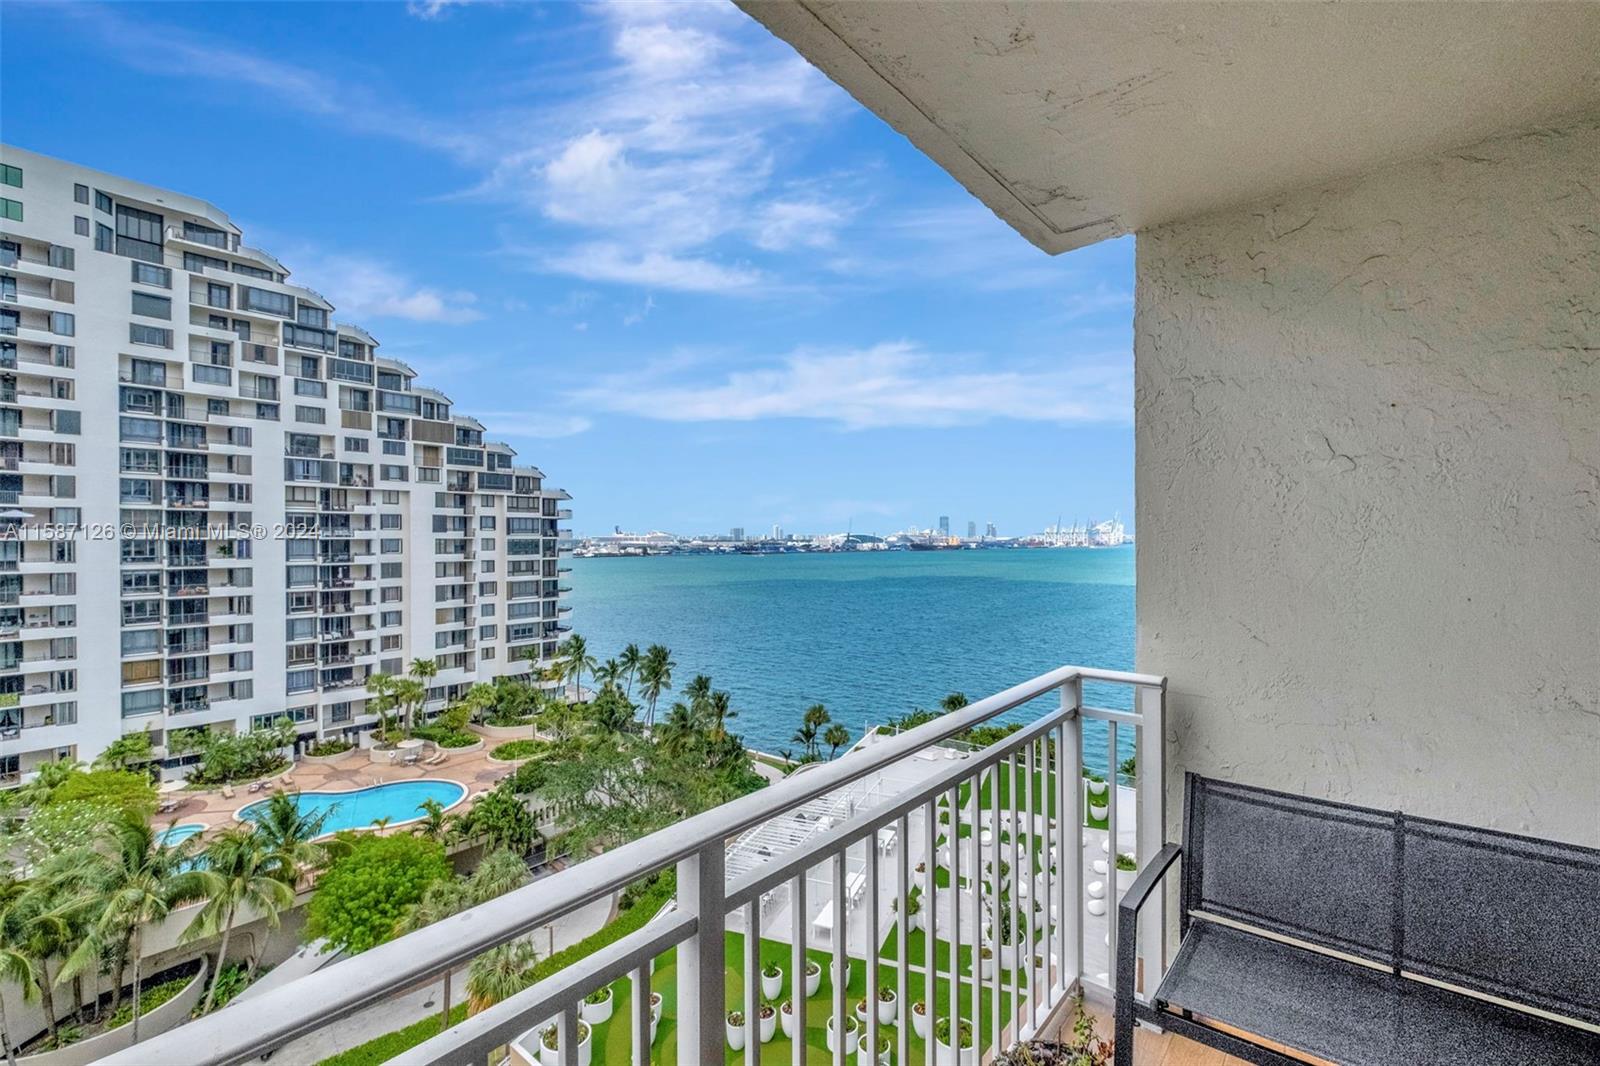 Look no further than this bright and beautiful 2 Bedroom/2 Bathroom home in the exclusive island oasis that is Brickell Key. Meticulously cared for and featuring gorgeous water views from condo. Highlights include stainless steel appliances, beautiful tile flooring, renovated kitchen & bathrooms. The Isola Brickell Key is a bay-front luxury condominium located steps away from the Brickell night life. Brand new pool & outdoor facilities are the finest on the island. Residents enjoy unsurpassed location, safety, & convenience. Amenities include tennis courts, fitness center, swimming pool, hot tub, social room, outdoor bar, bbq area, and a business center, as well as concierge & valet parking services.